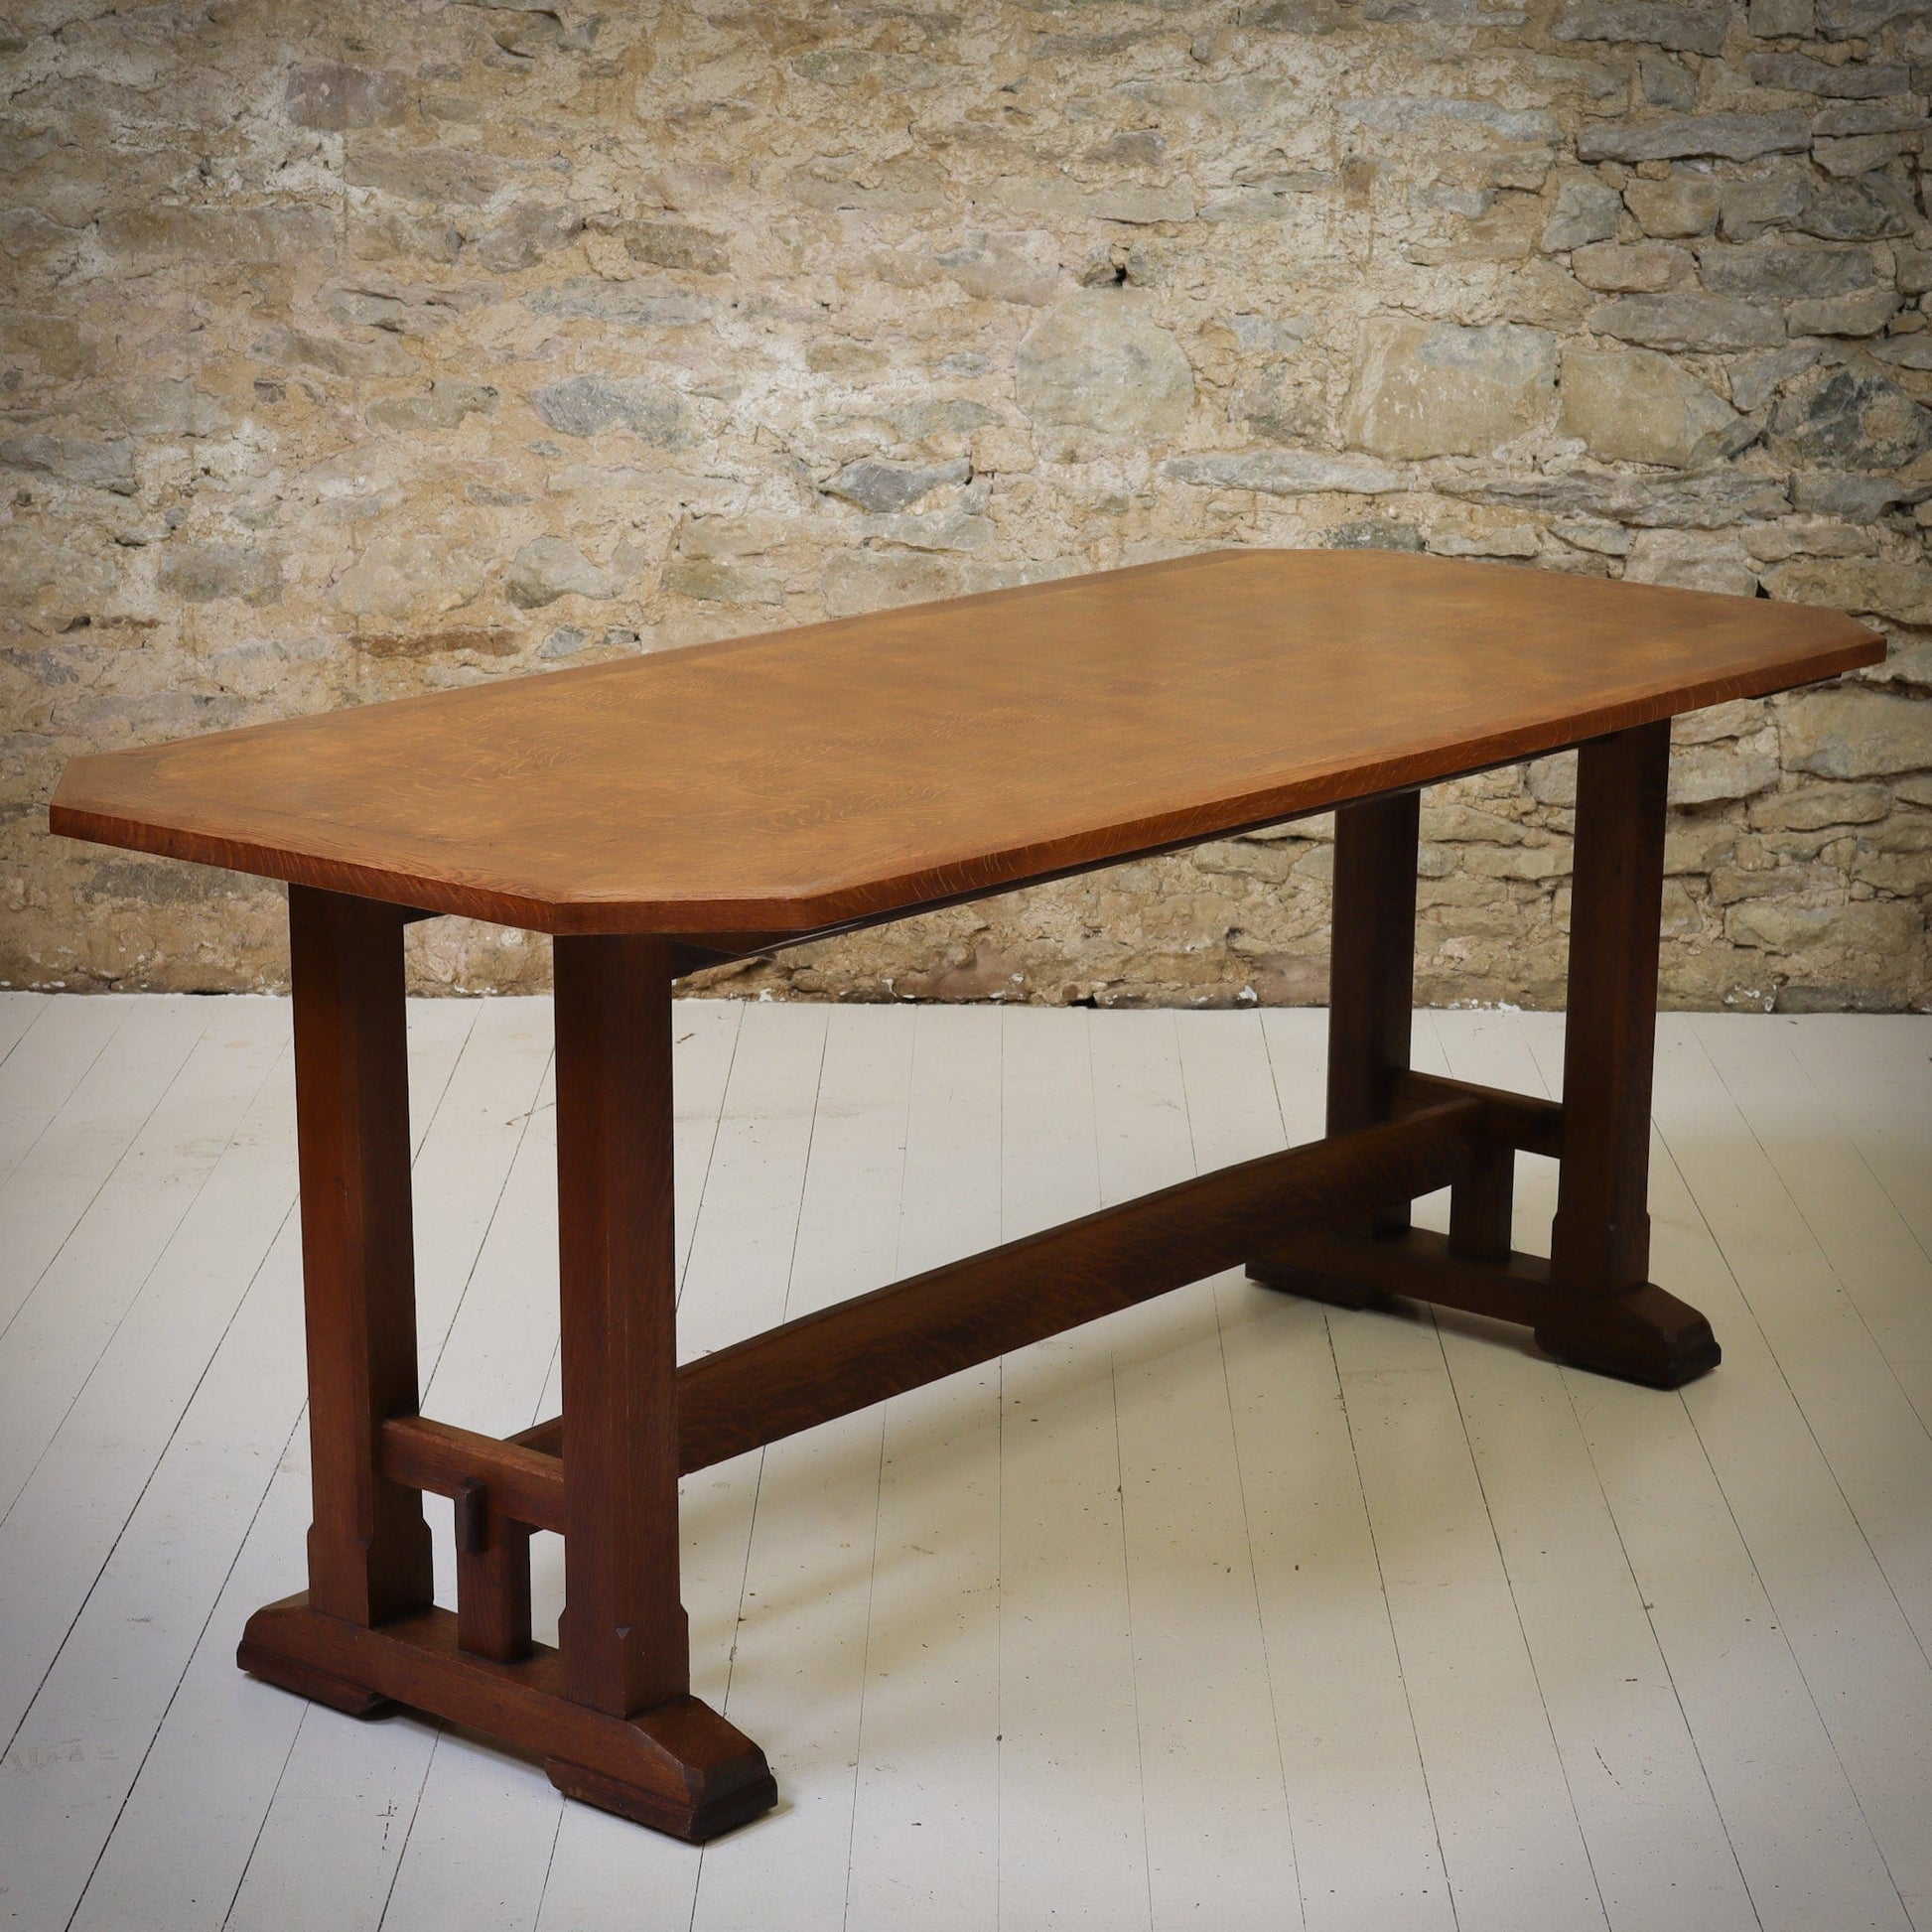 Brynmawr Furniture Company  Arts & Crafts Cotswold School Oak Dining Table